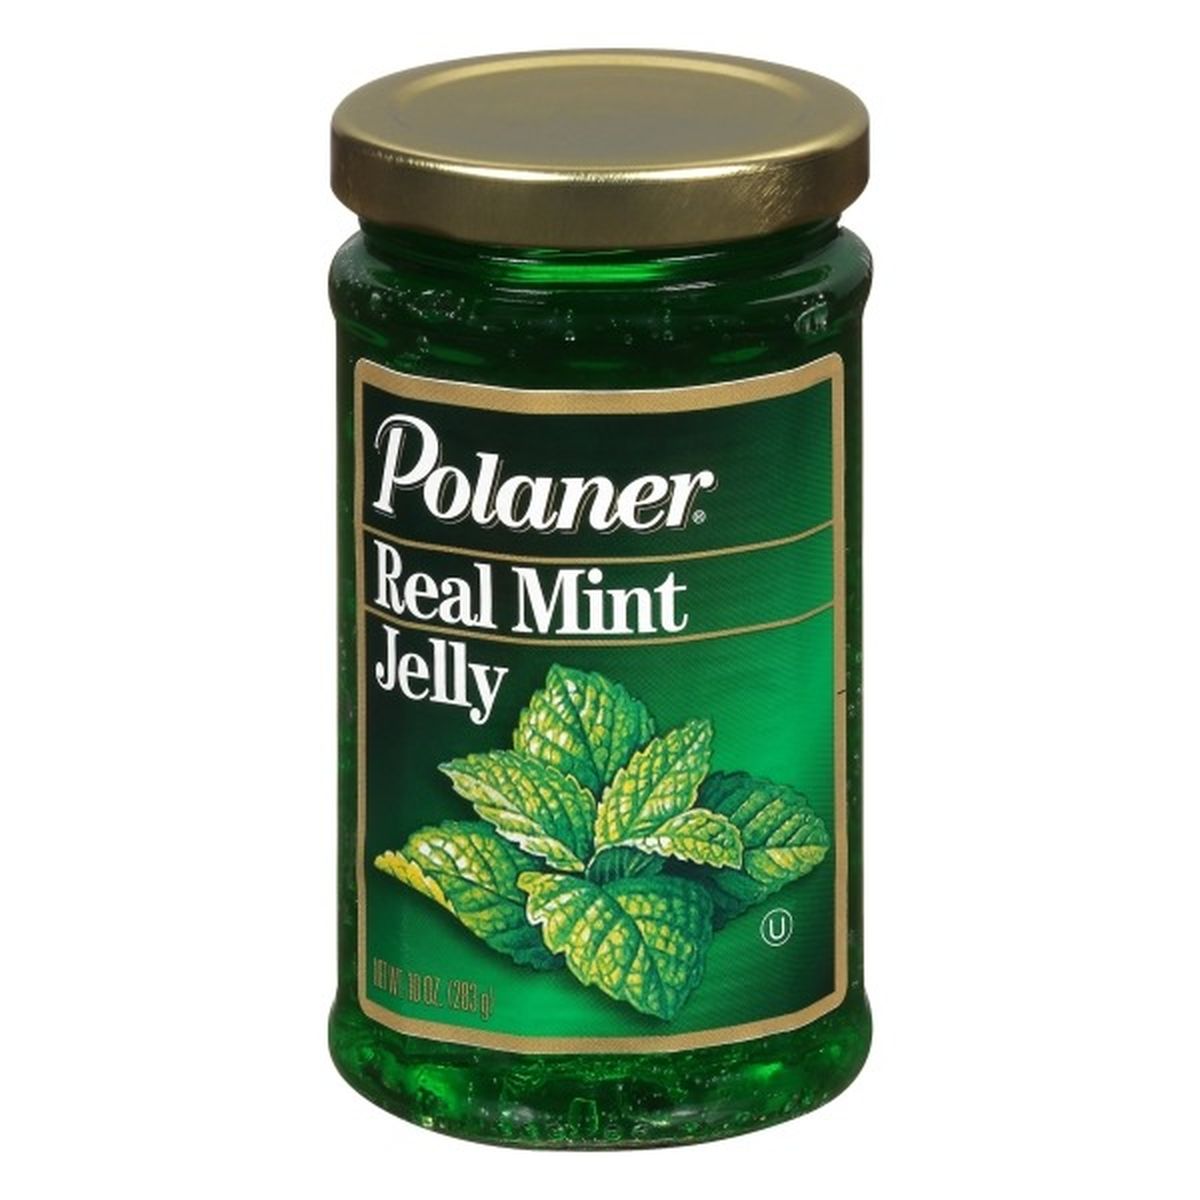 Calories in Polaner Jelly, Real Mint